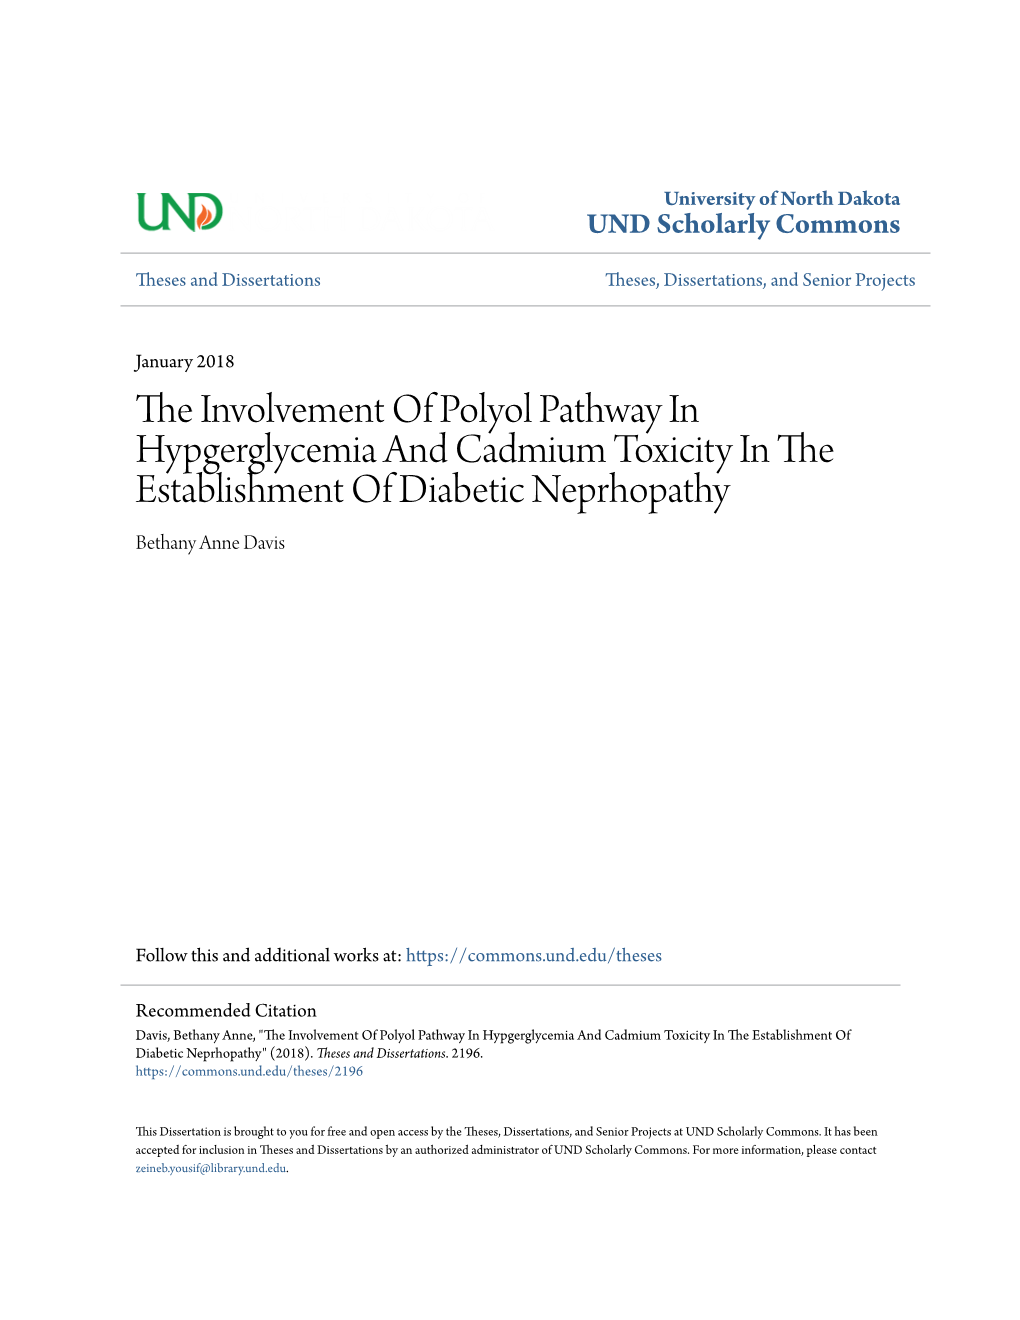 The Involvement of Polyol Pathway in Hypgerglycemia and Cadmium Toxicity in the Establishment of Diabetic Neprhopathy